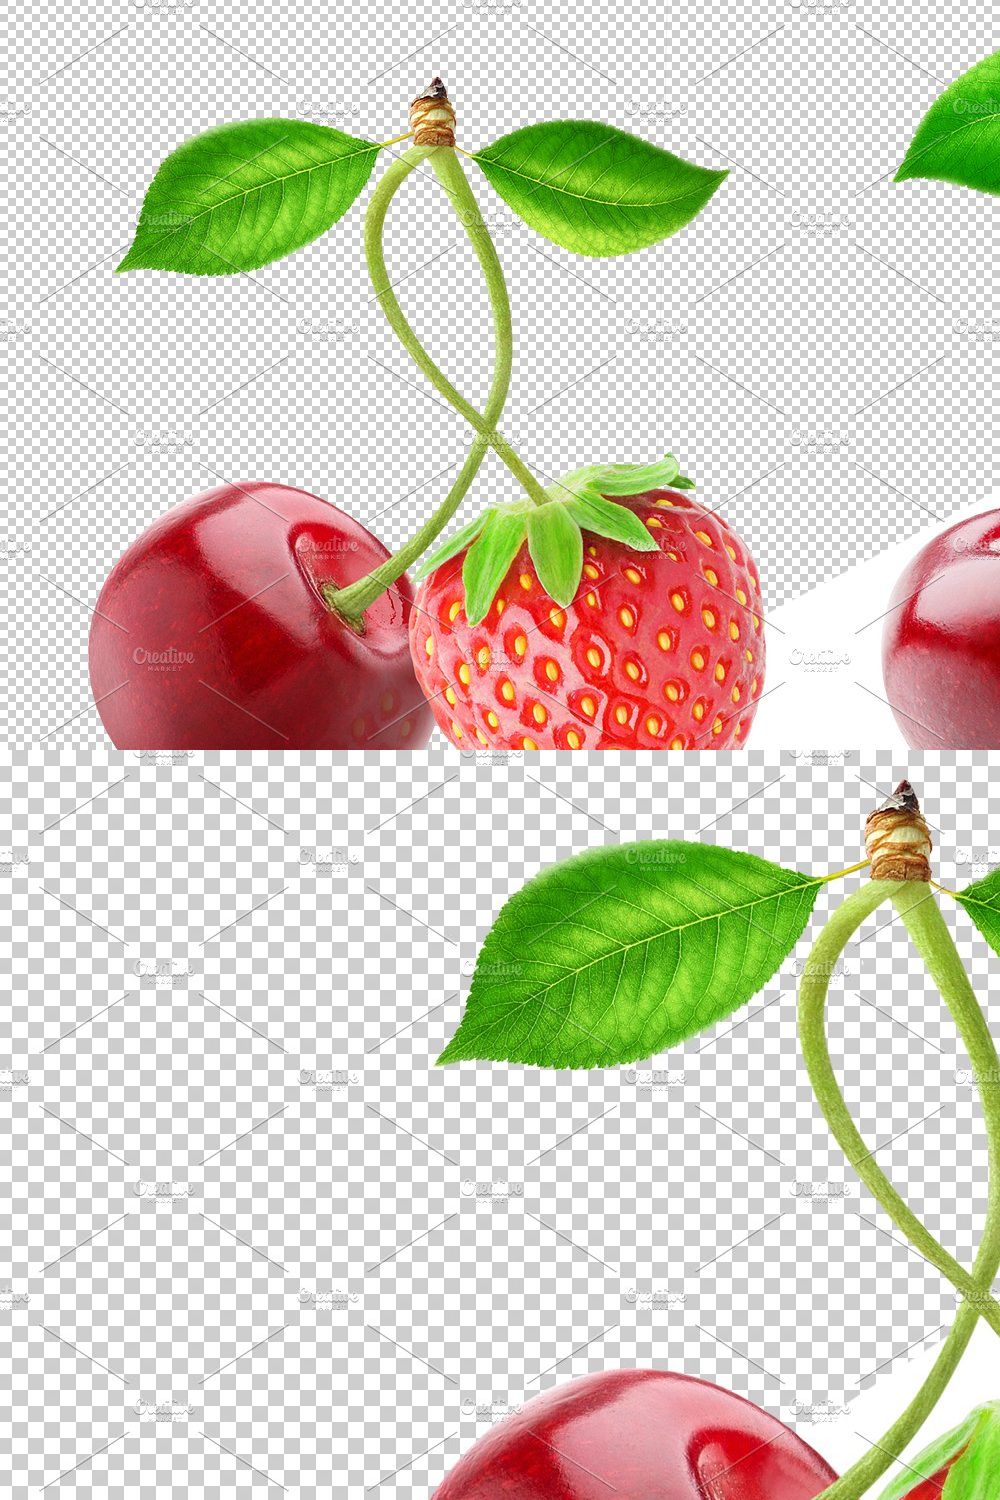 Different berries on one stem pinterest preview image.